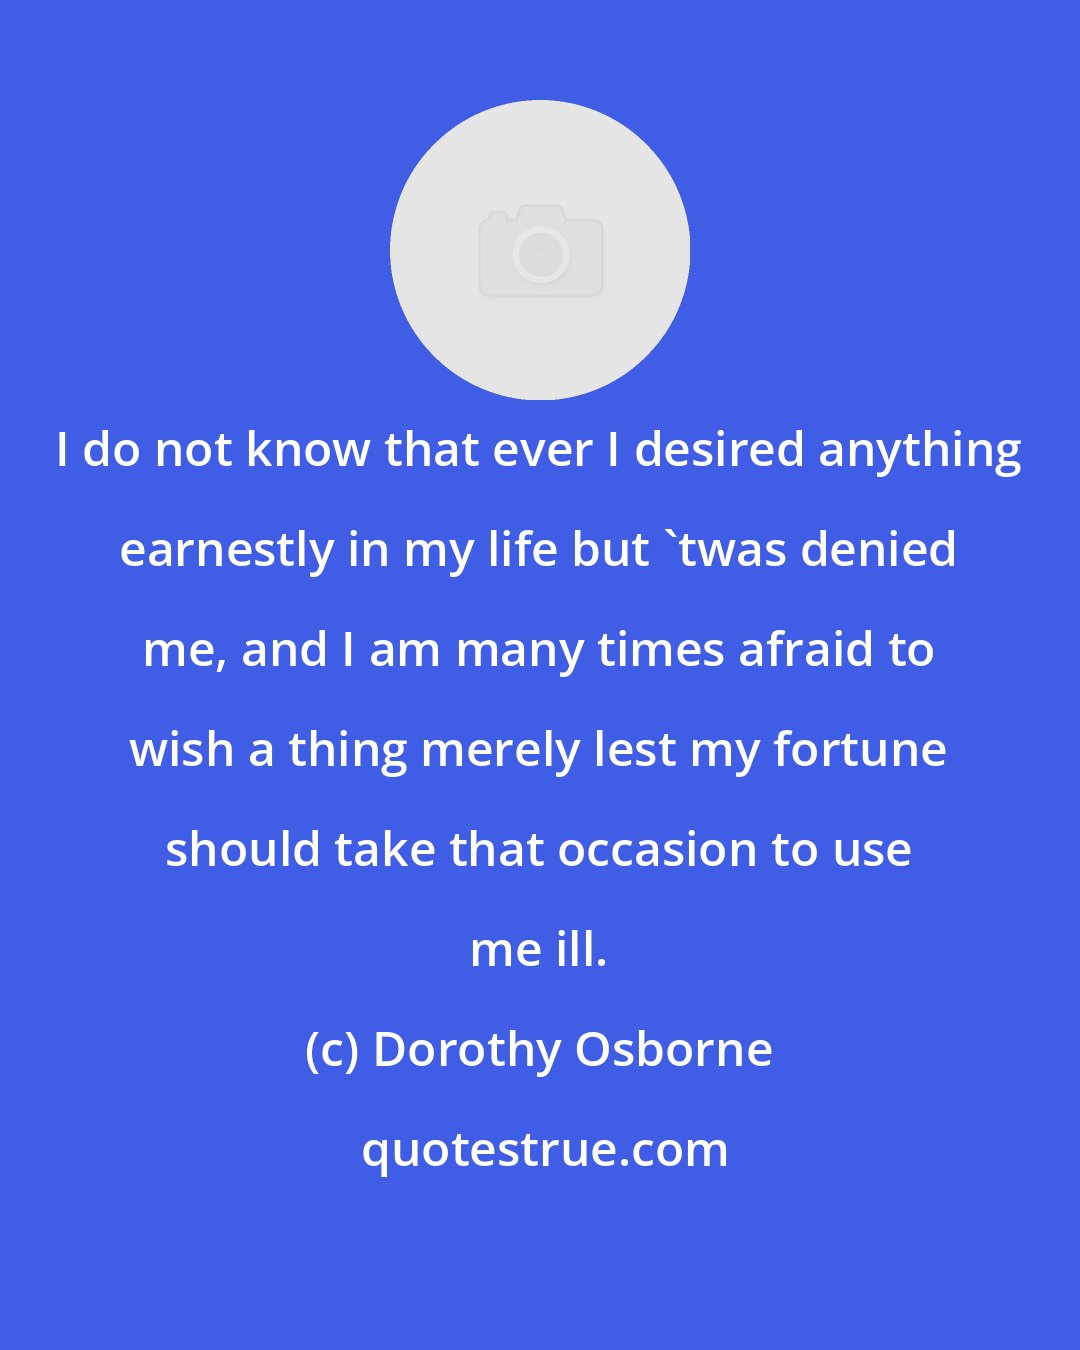 Dorothy Osborne: I do not know that ever I desired anything earnestly in my life but 'twas denied me, and I am many times afraid to wish a thing merely lest my fortune should take that occasion to use me ill.